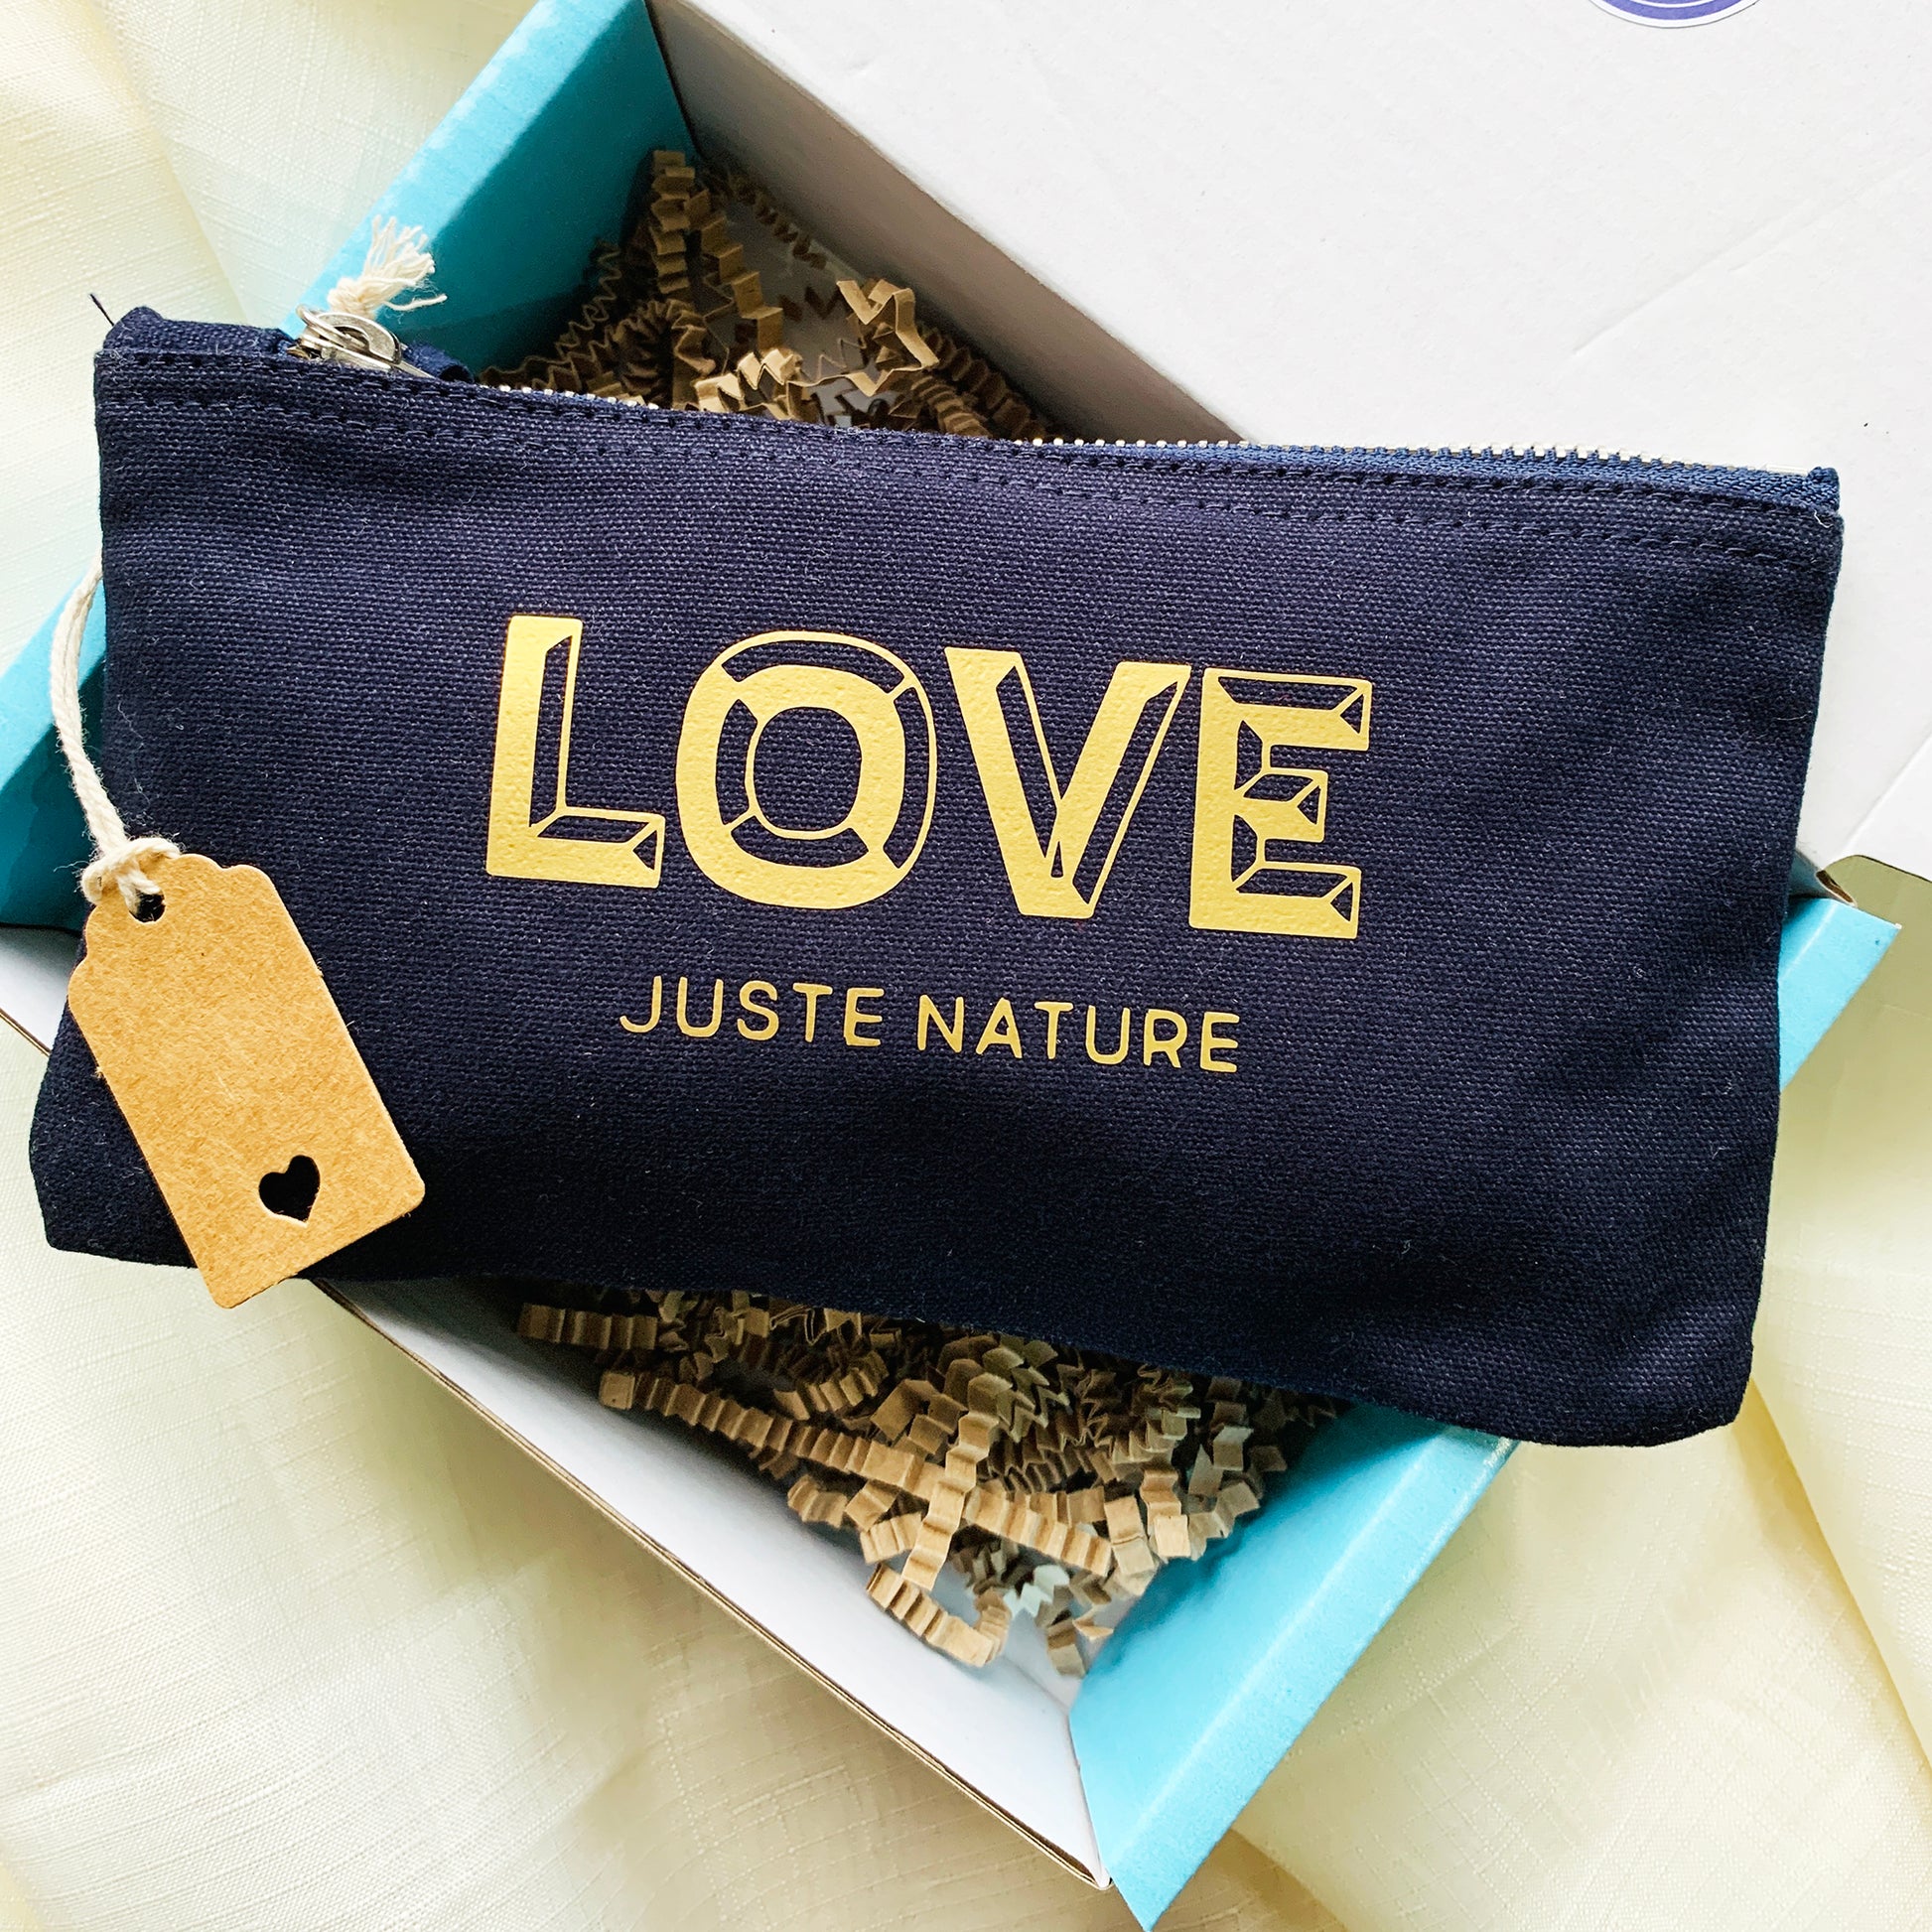 juste nature mothers day gift set